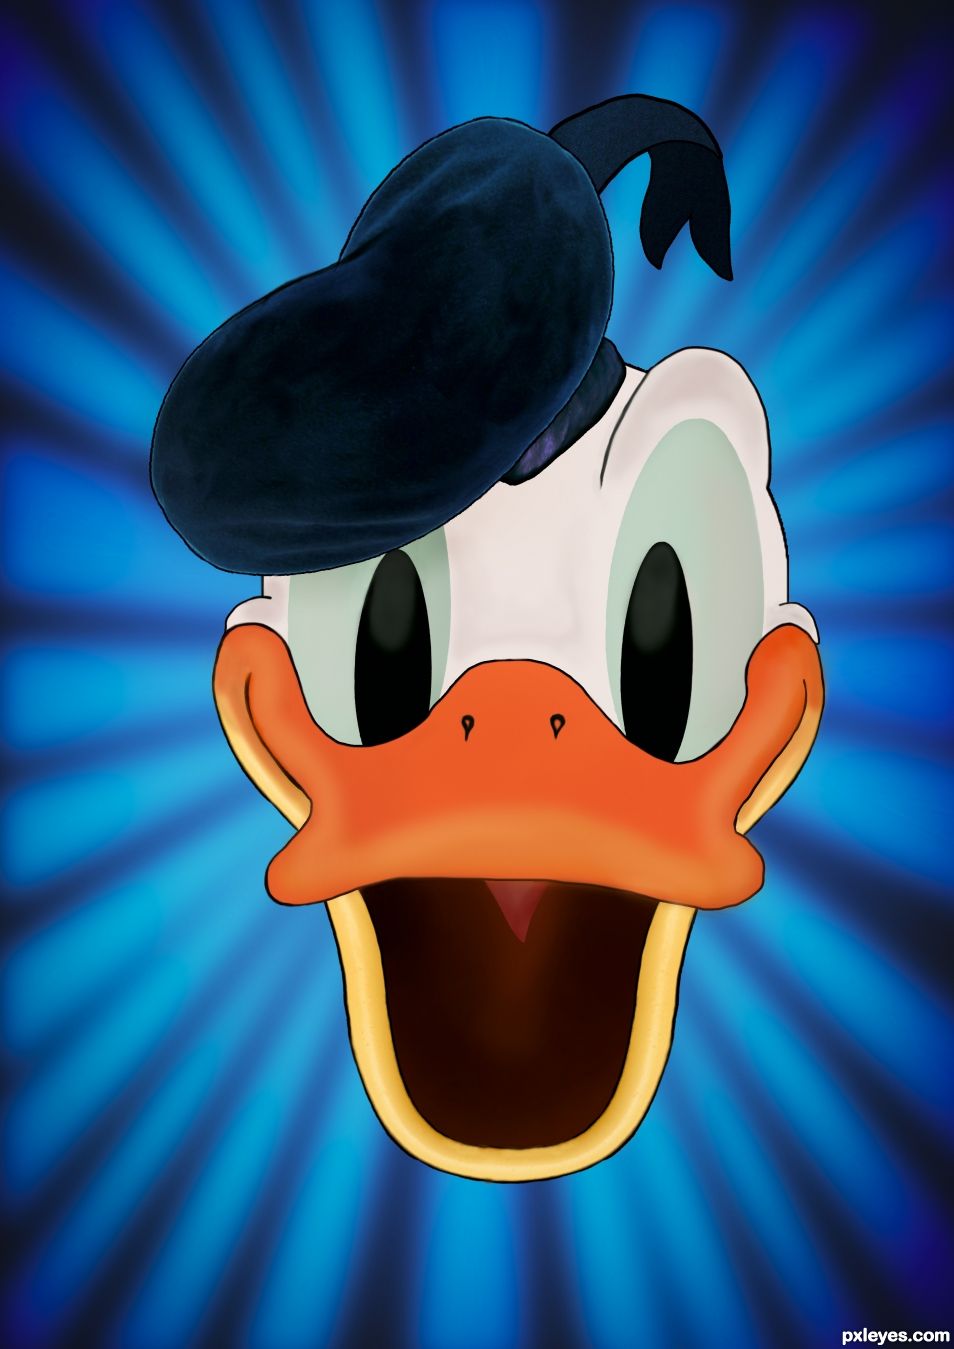 Creation of Donald Duck: Final Result